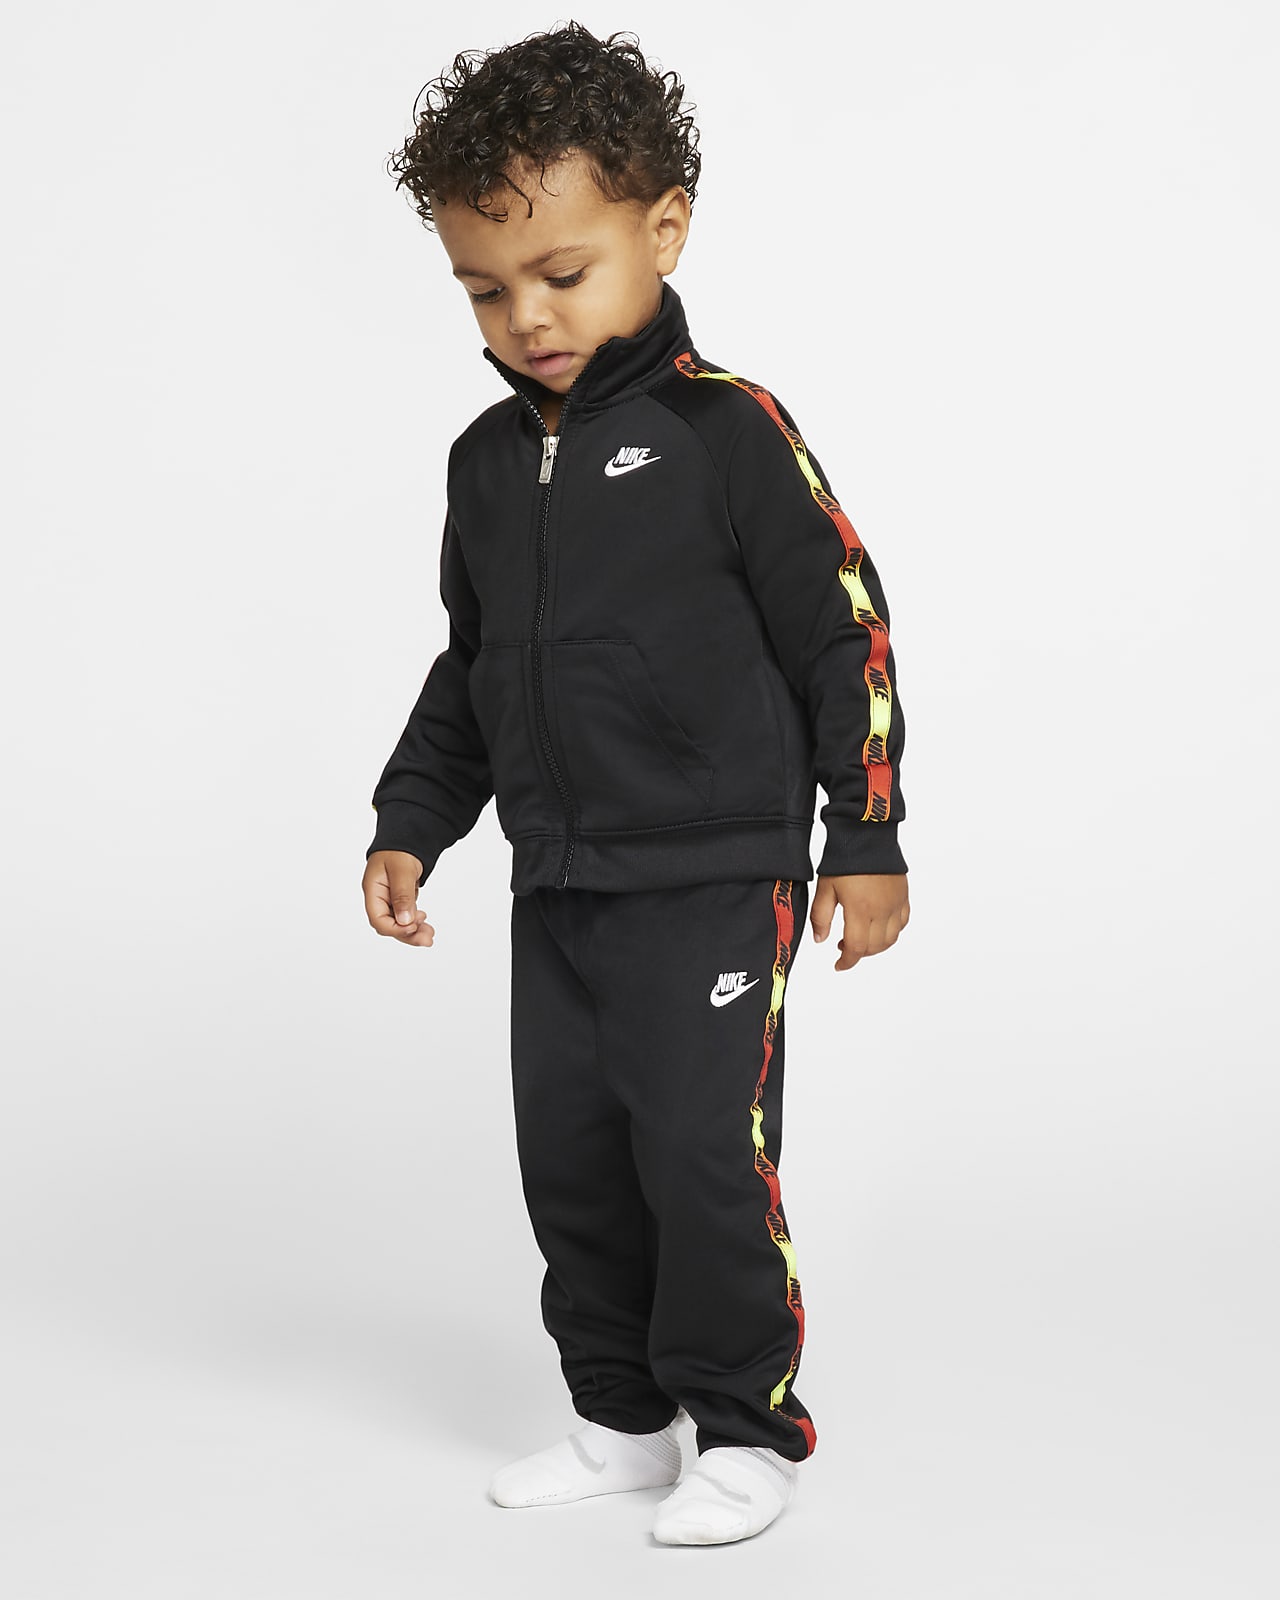 Infant Sportswear | peacecommission.kdsg.gov.ng